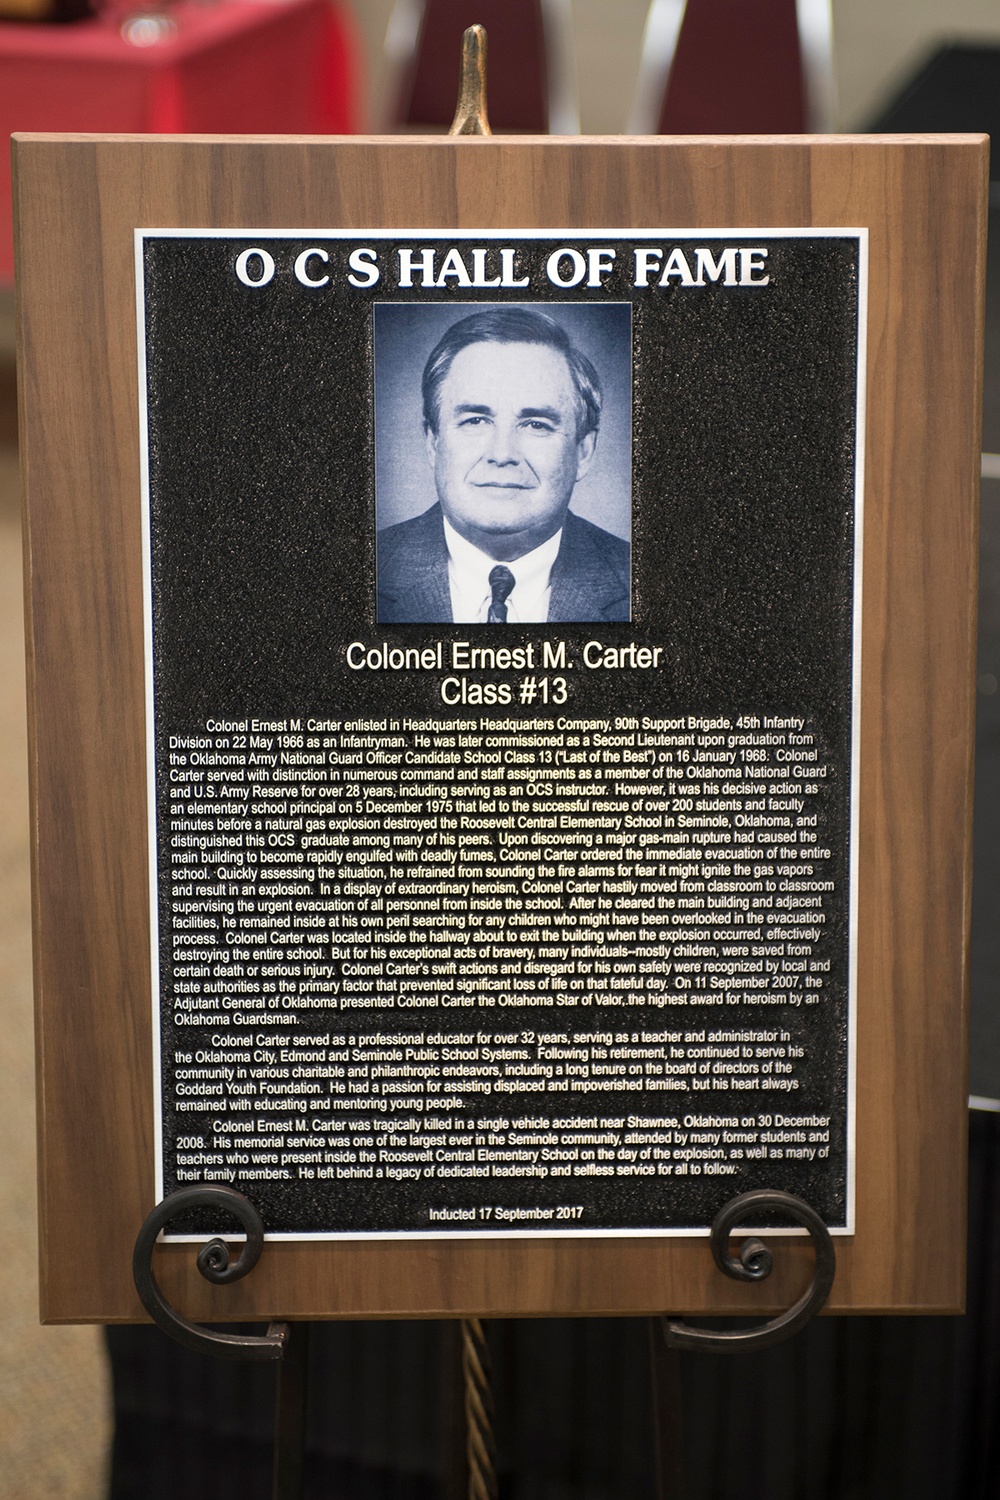 Seminole educator and Guardsman inducted into OCS Hall of Fame